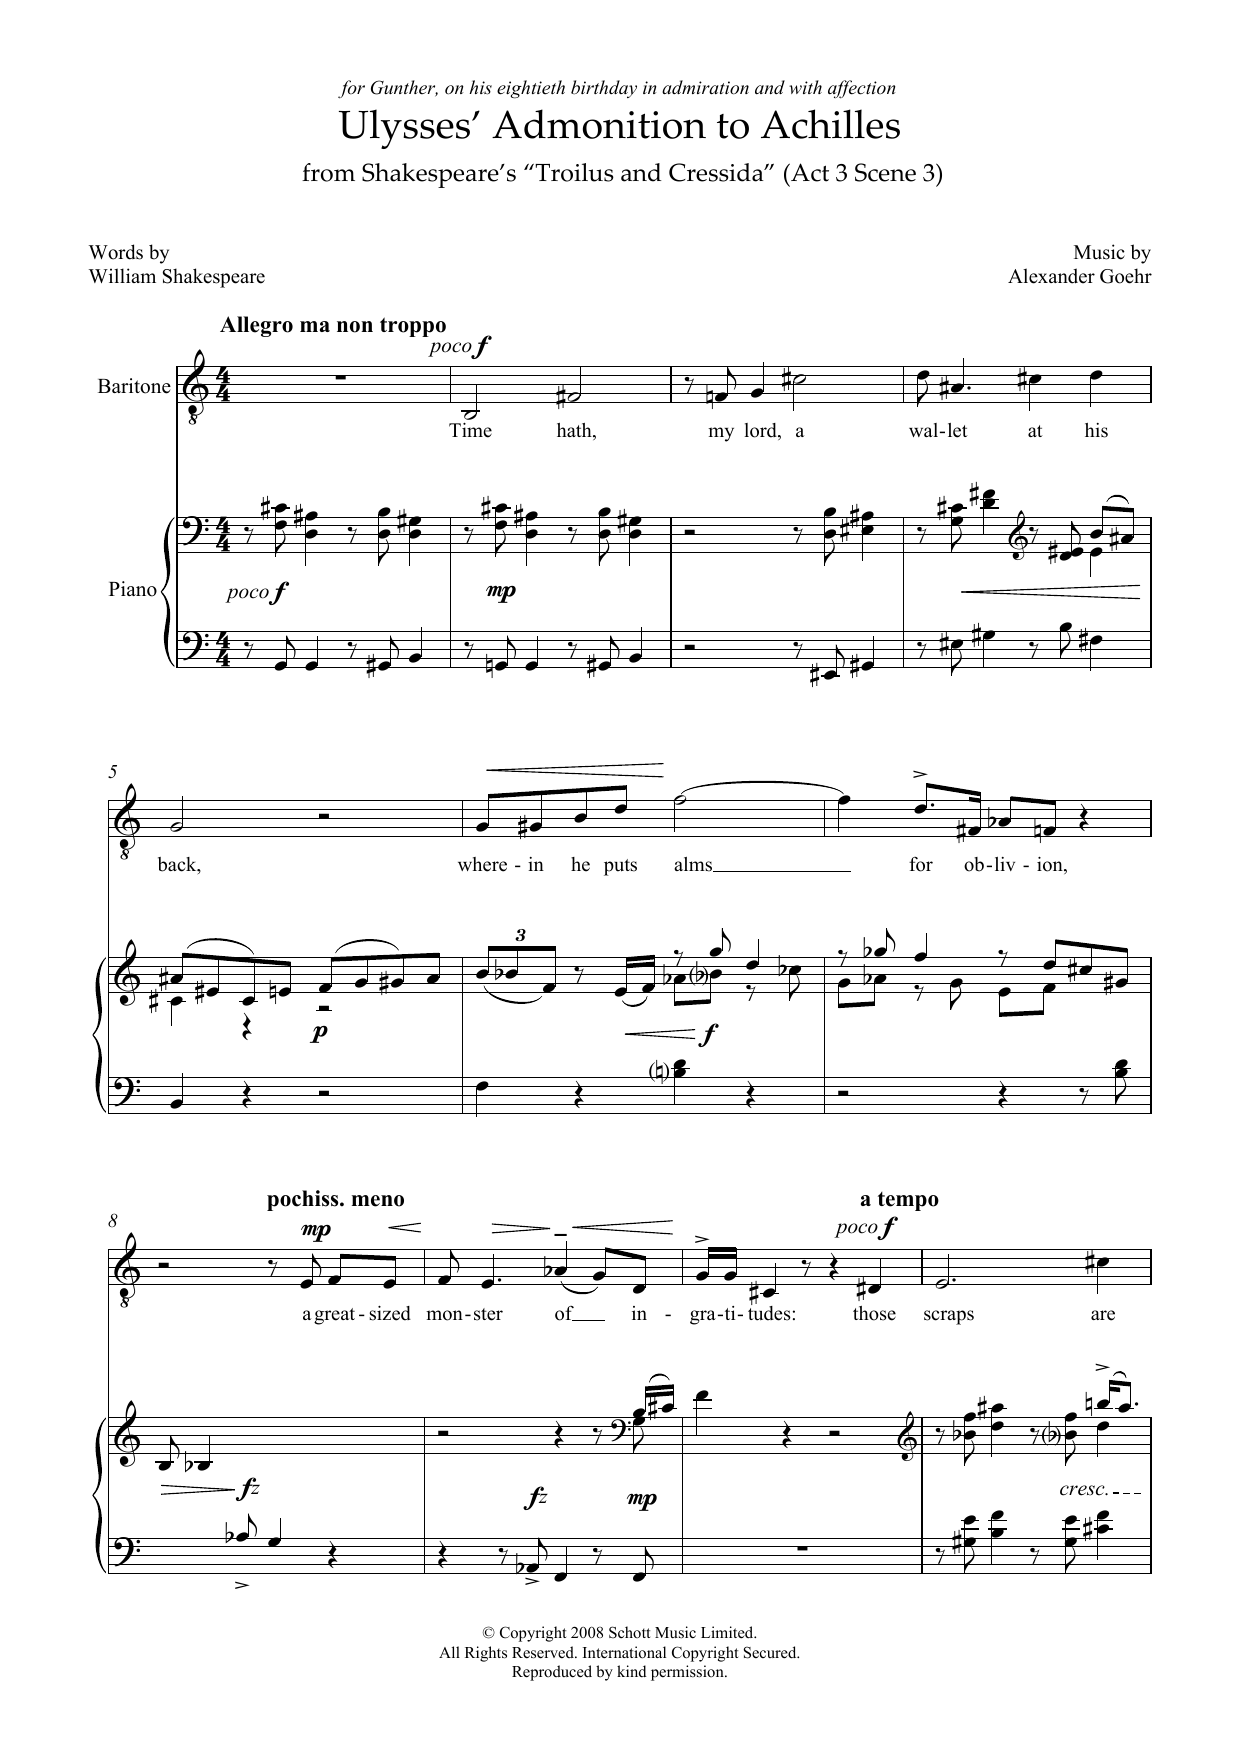 Alexander Goehr Ulysses' Admonition to Achilles (for baritone & piano) sheet music notes and chords. Download Printable PDF.